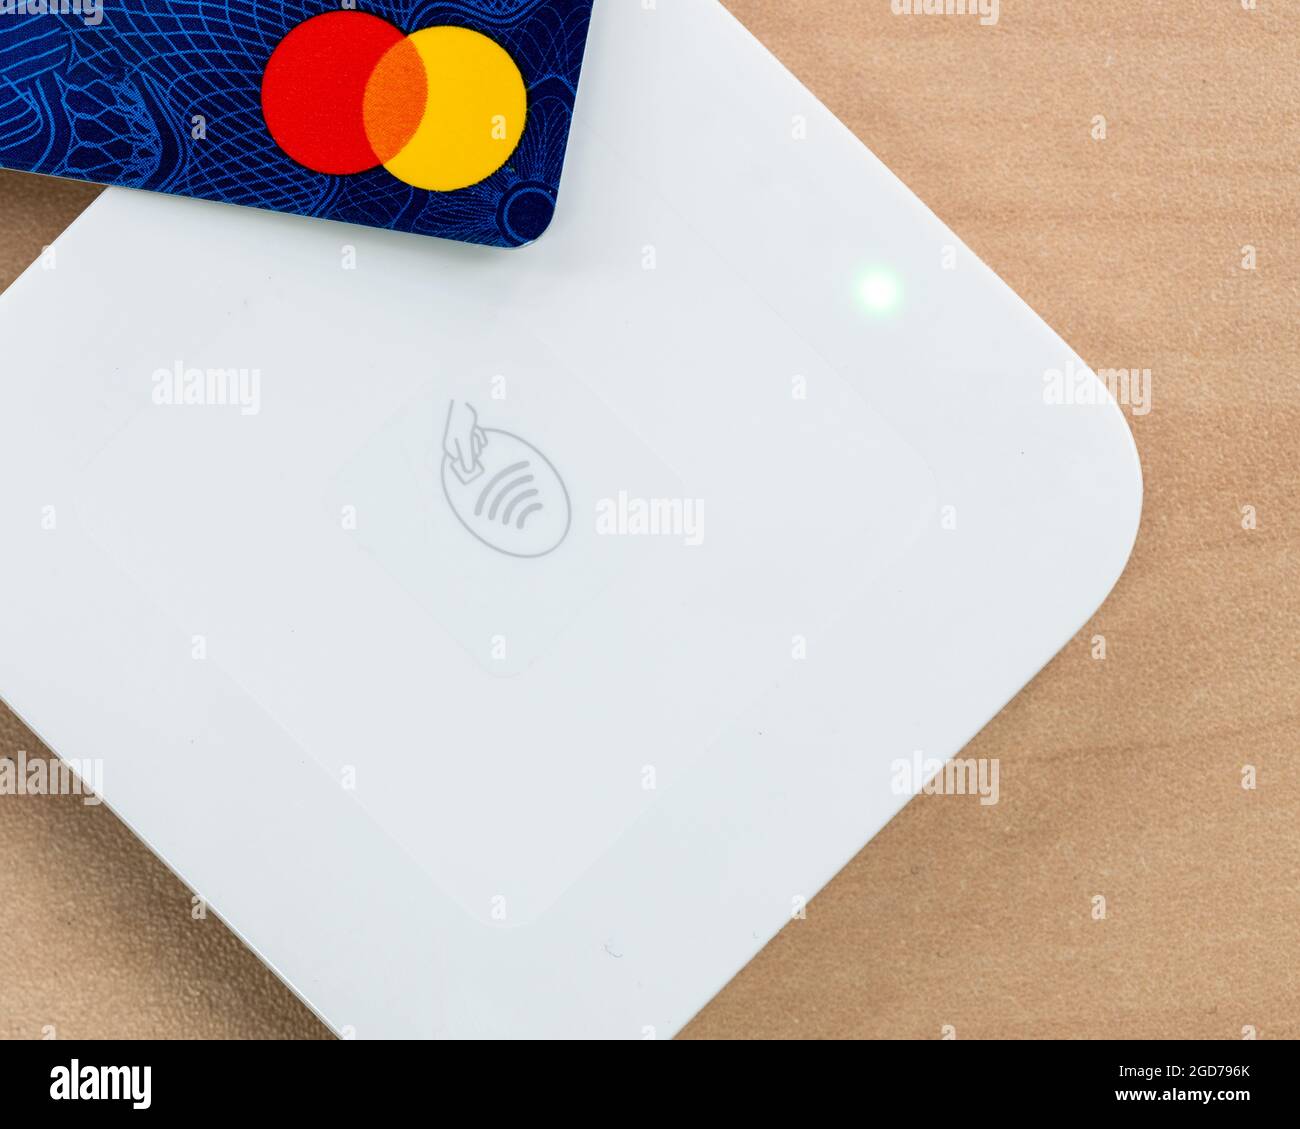 Credit card contactless payment system Stock Photo